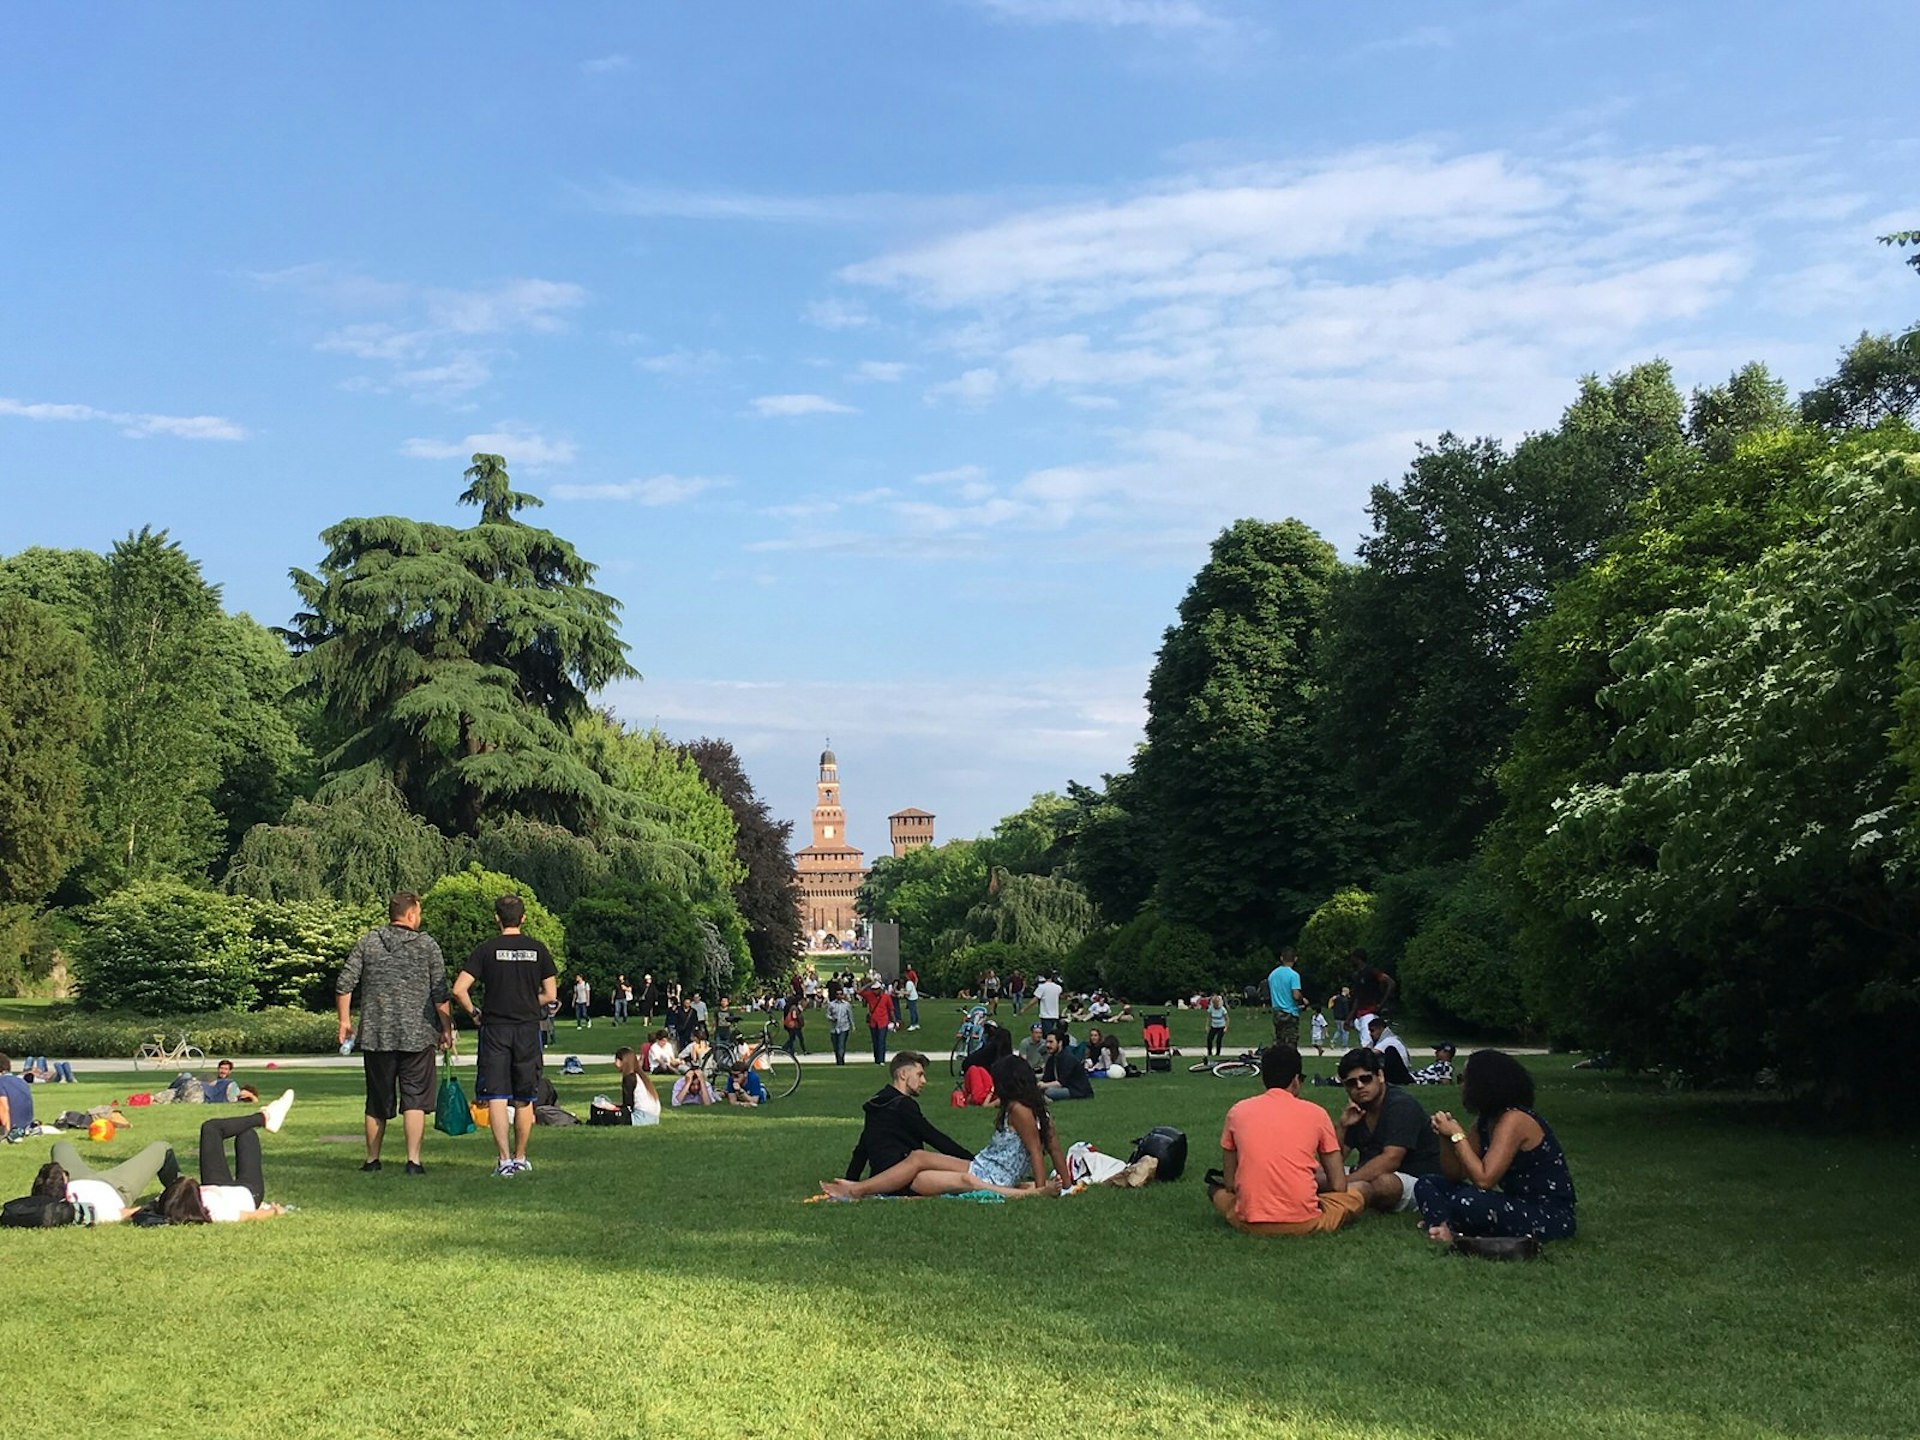 Locals hanging out on the grass in Parco Sempione; there are trees and bushes beyond them, with the imposing red-brick Castello Sforzesco visible further on. 